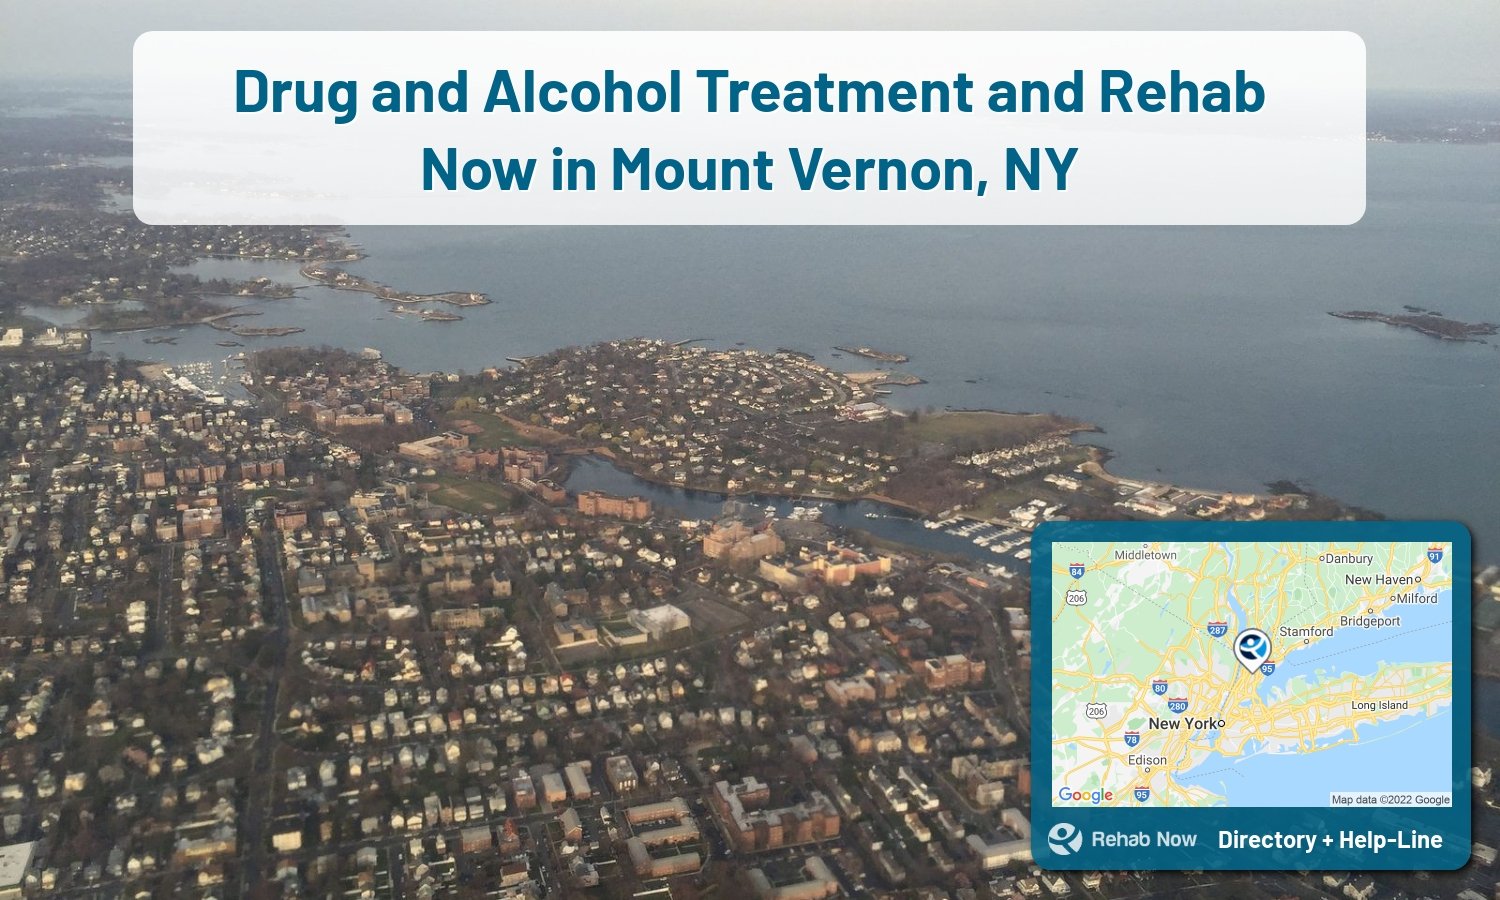 Mount Vernon, NY Treatment Centers. Find drug rehab in Mount Vernon, New York, or detox and treatment programs. Get the right help now!